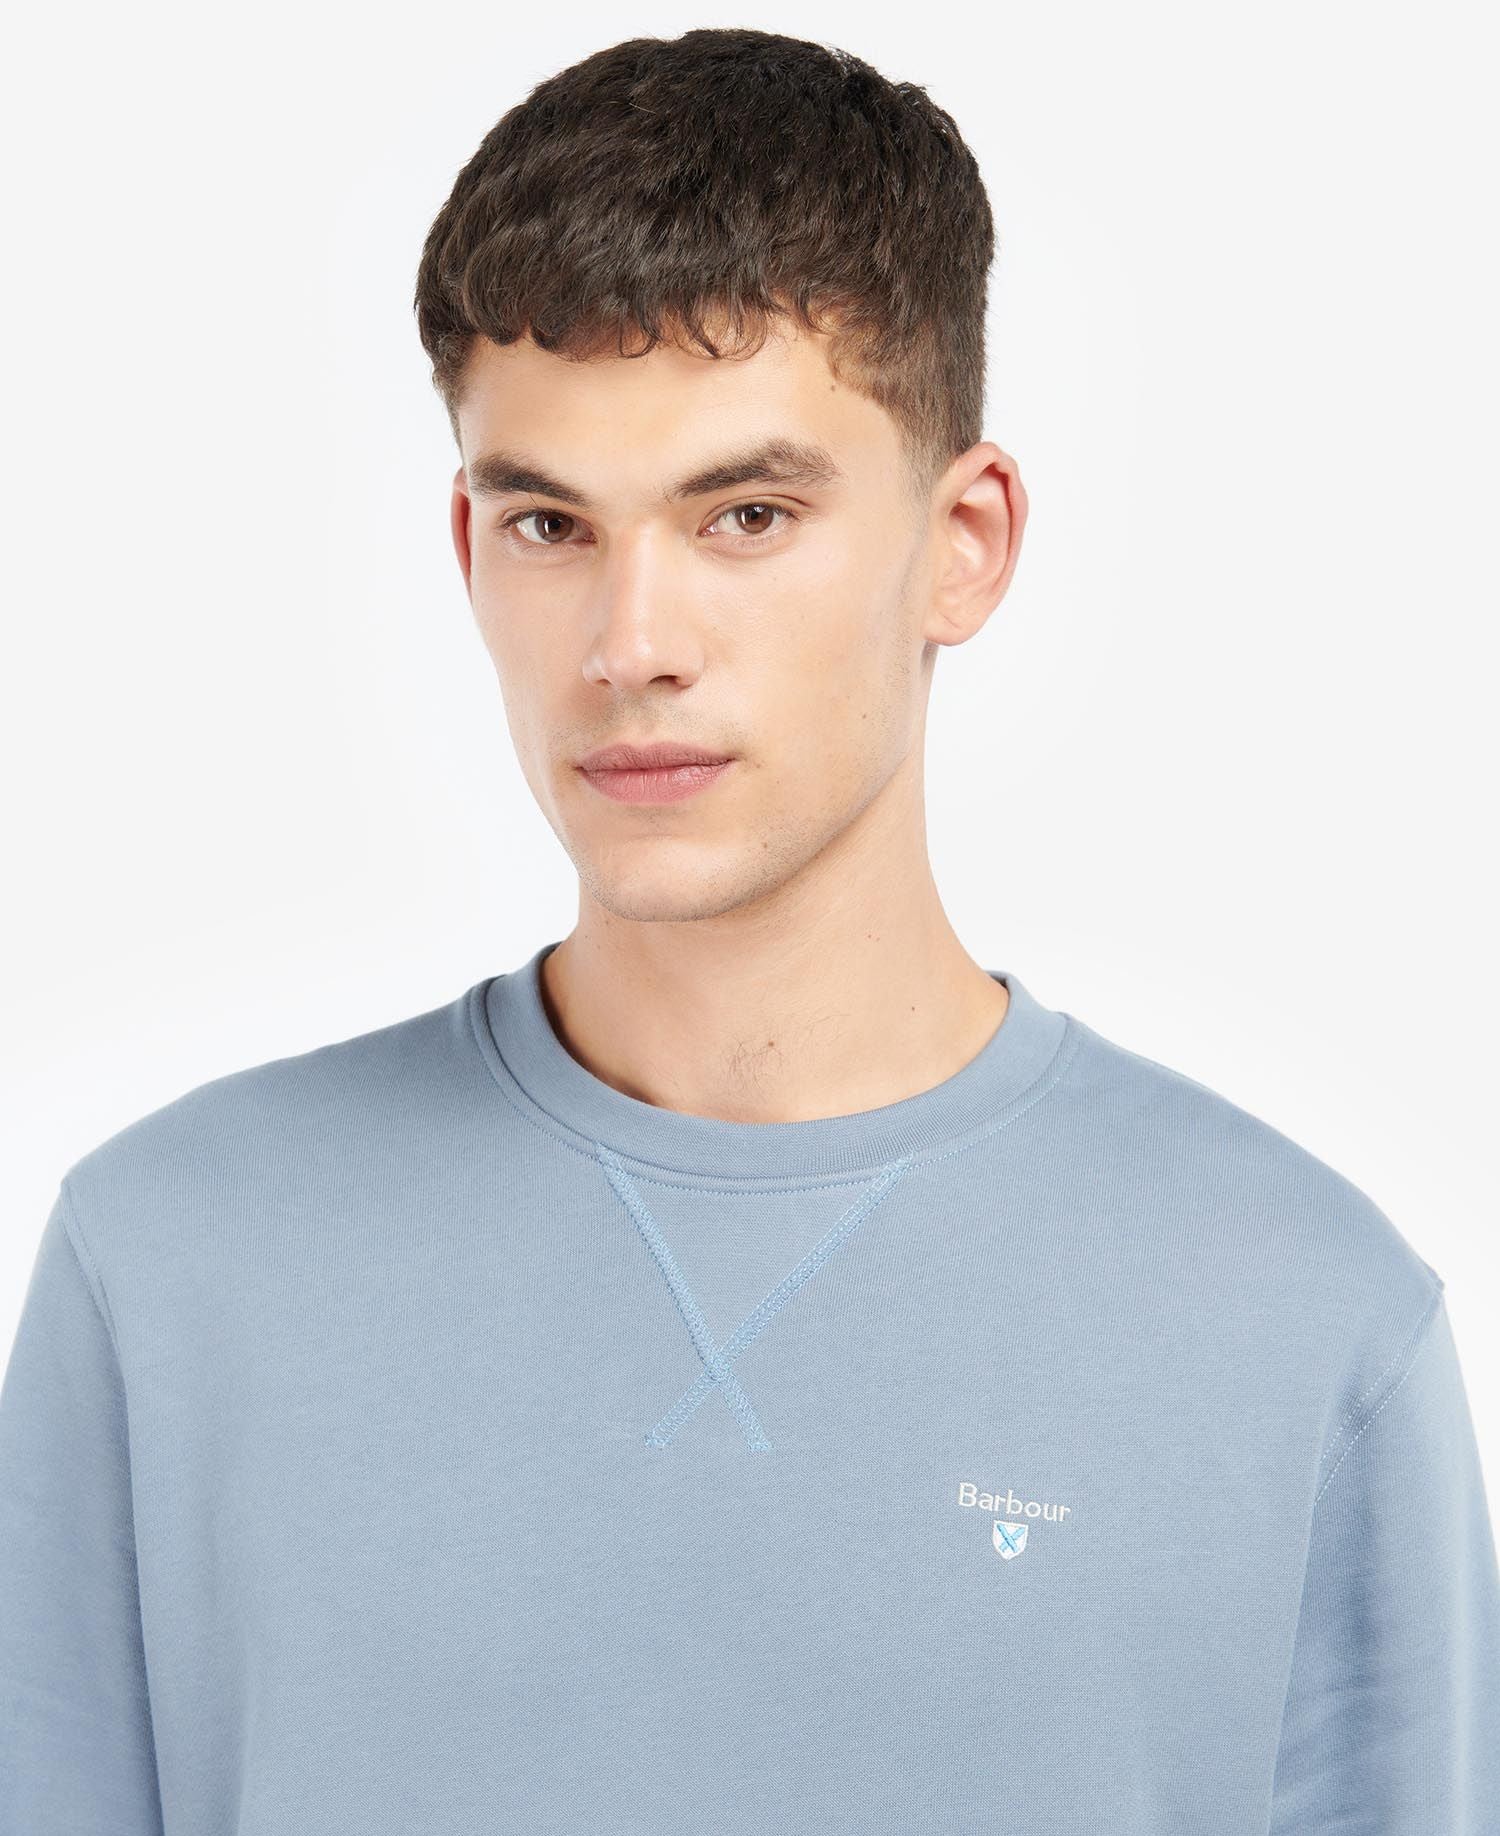 Men's Ridsdale Crew Neck - Washed Blue